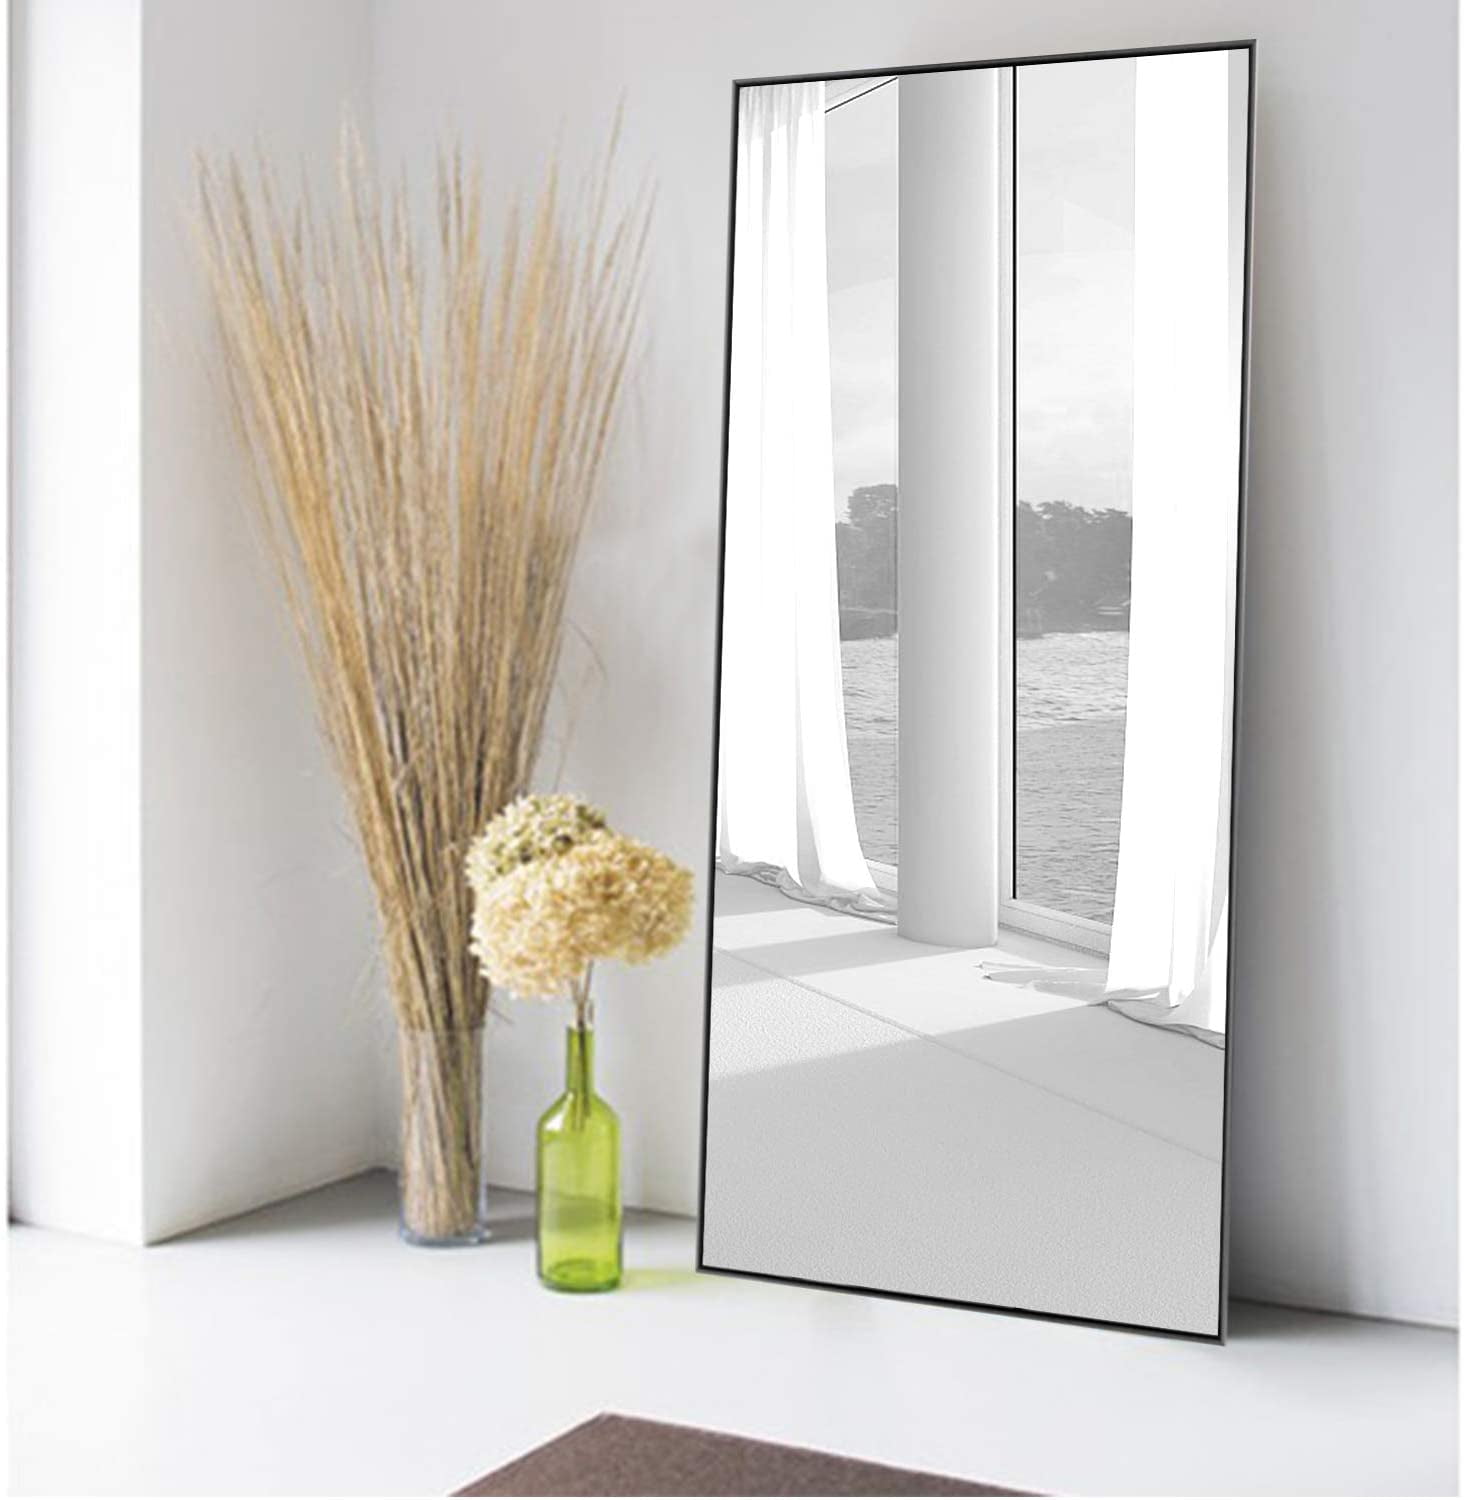 Can be pasted can be wall-mounted dressing mirror bedroom fitting mirror wall-mounted pasting full-length mirror floor mirror 30 130cm makeup mirror 120/33 